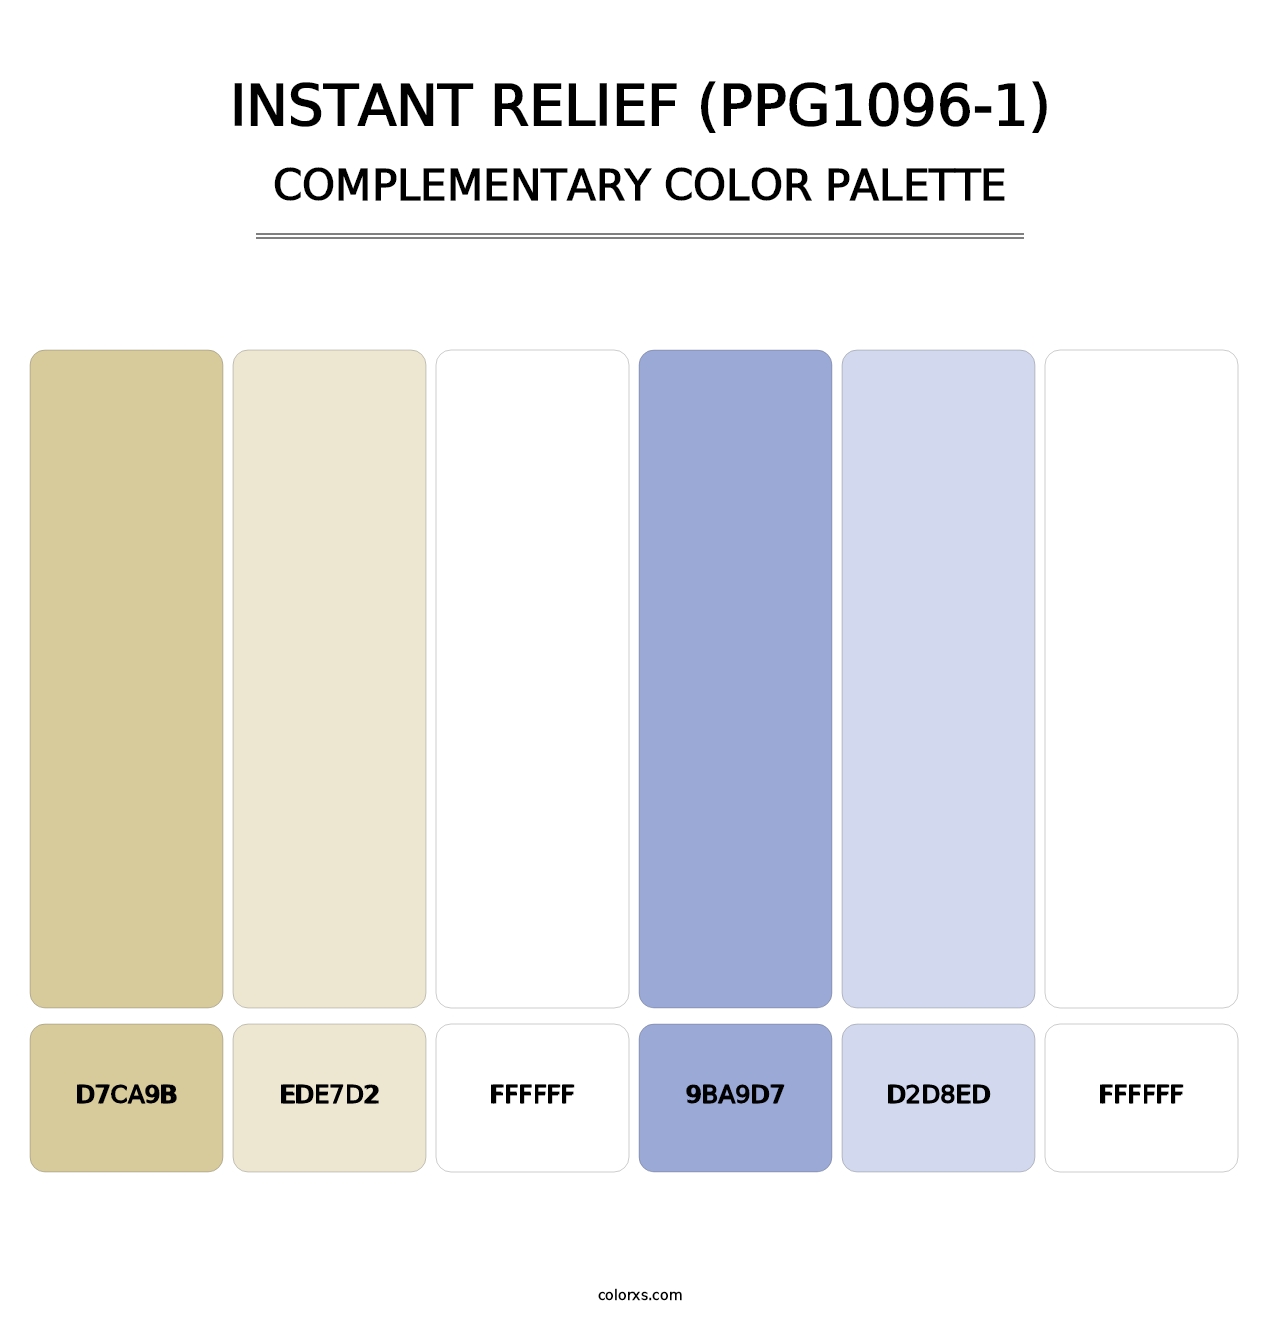 Instant Relief (PPG1096-1) - Complementary Color Palette